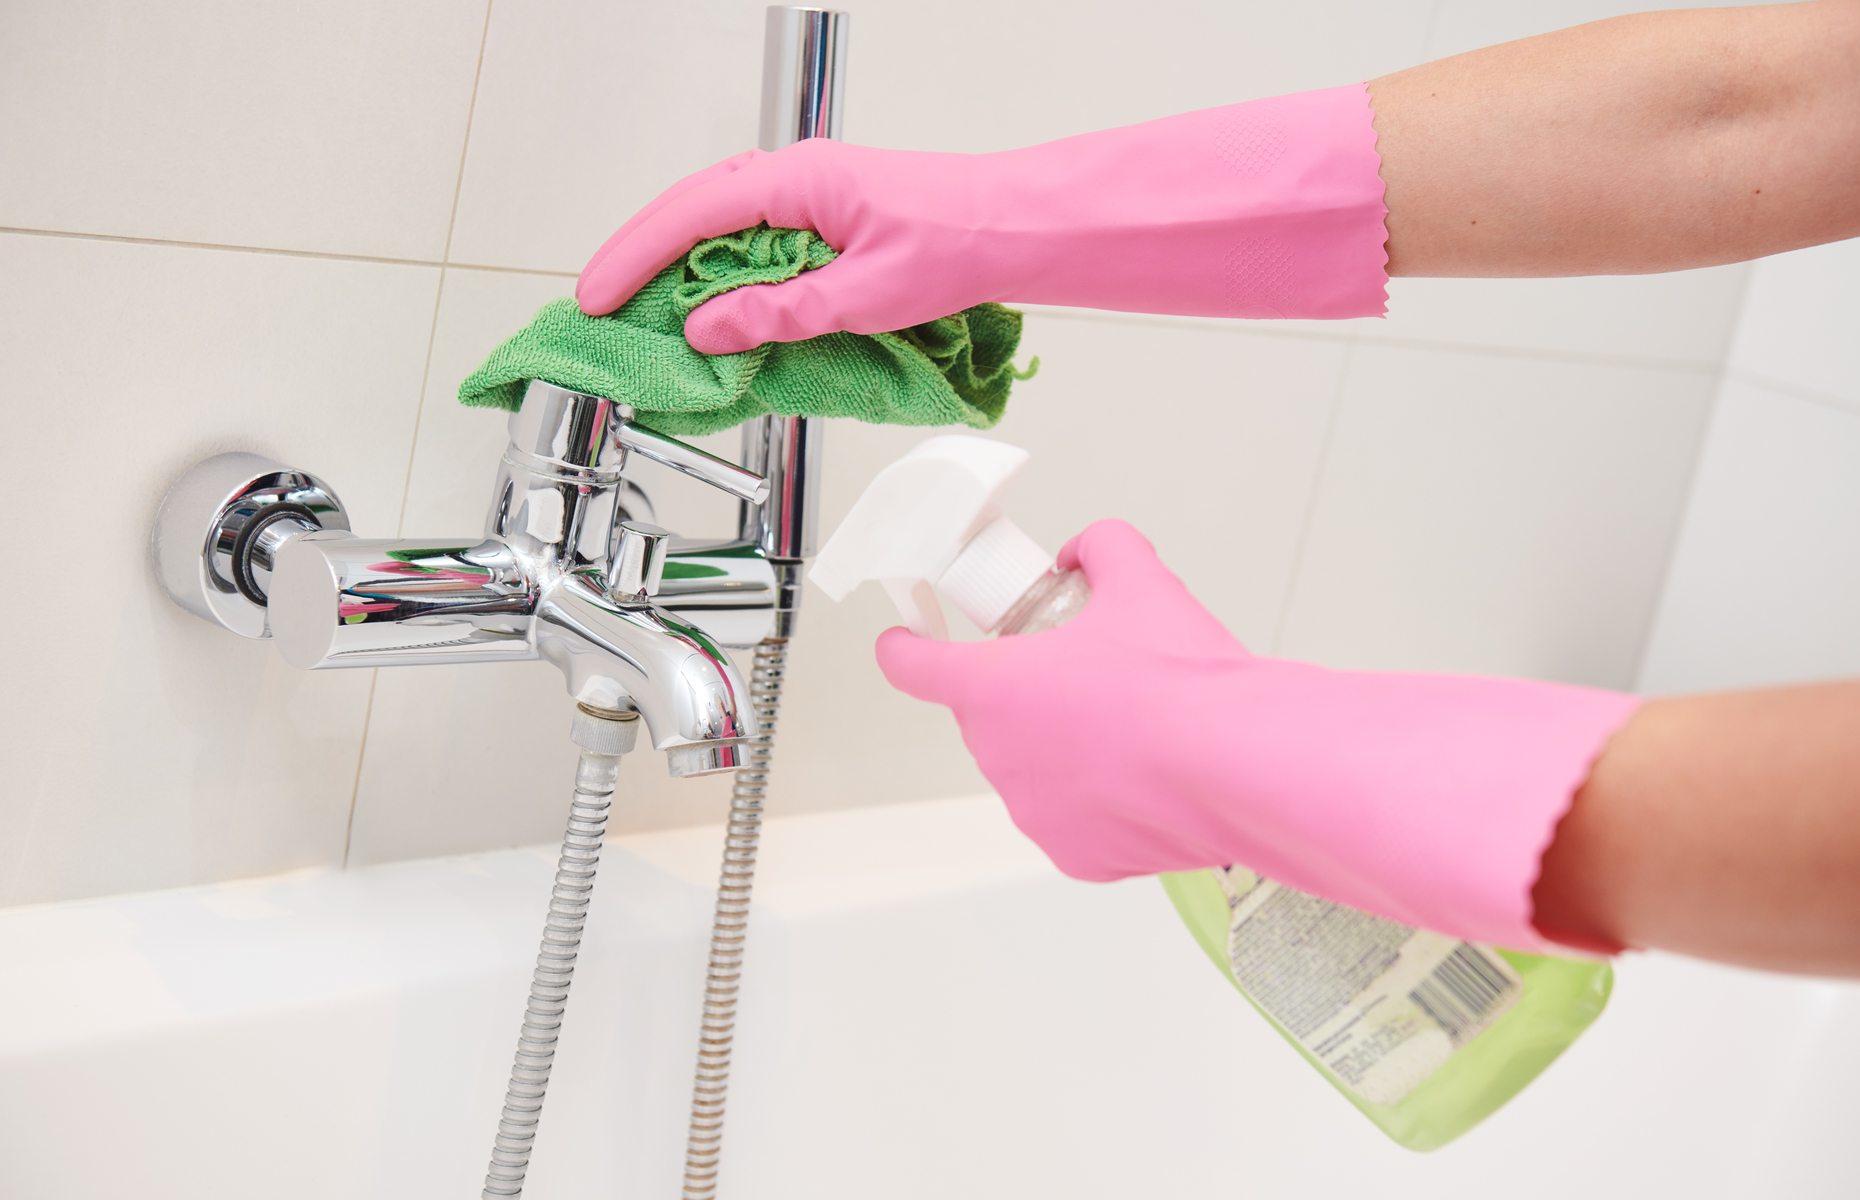 Pay careful attention to areas like kitchen and bathroom taps that are touched frequently. Image: Dmitry Kalinovsky / Shutterstock